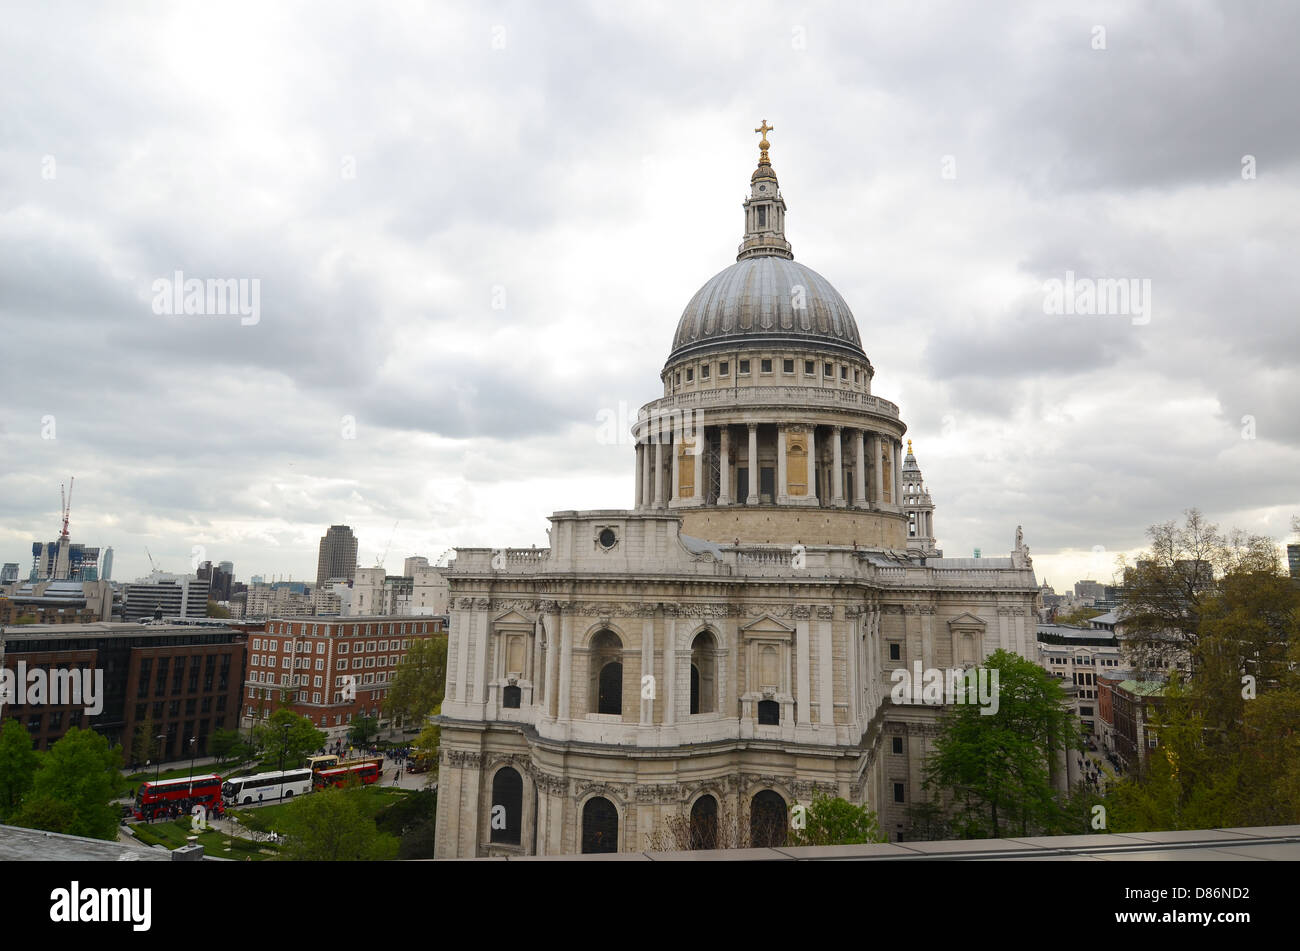 St. Paul's Cathedral seen from the top of One New Change in London, UK. Stock Photo